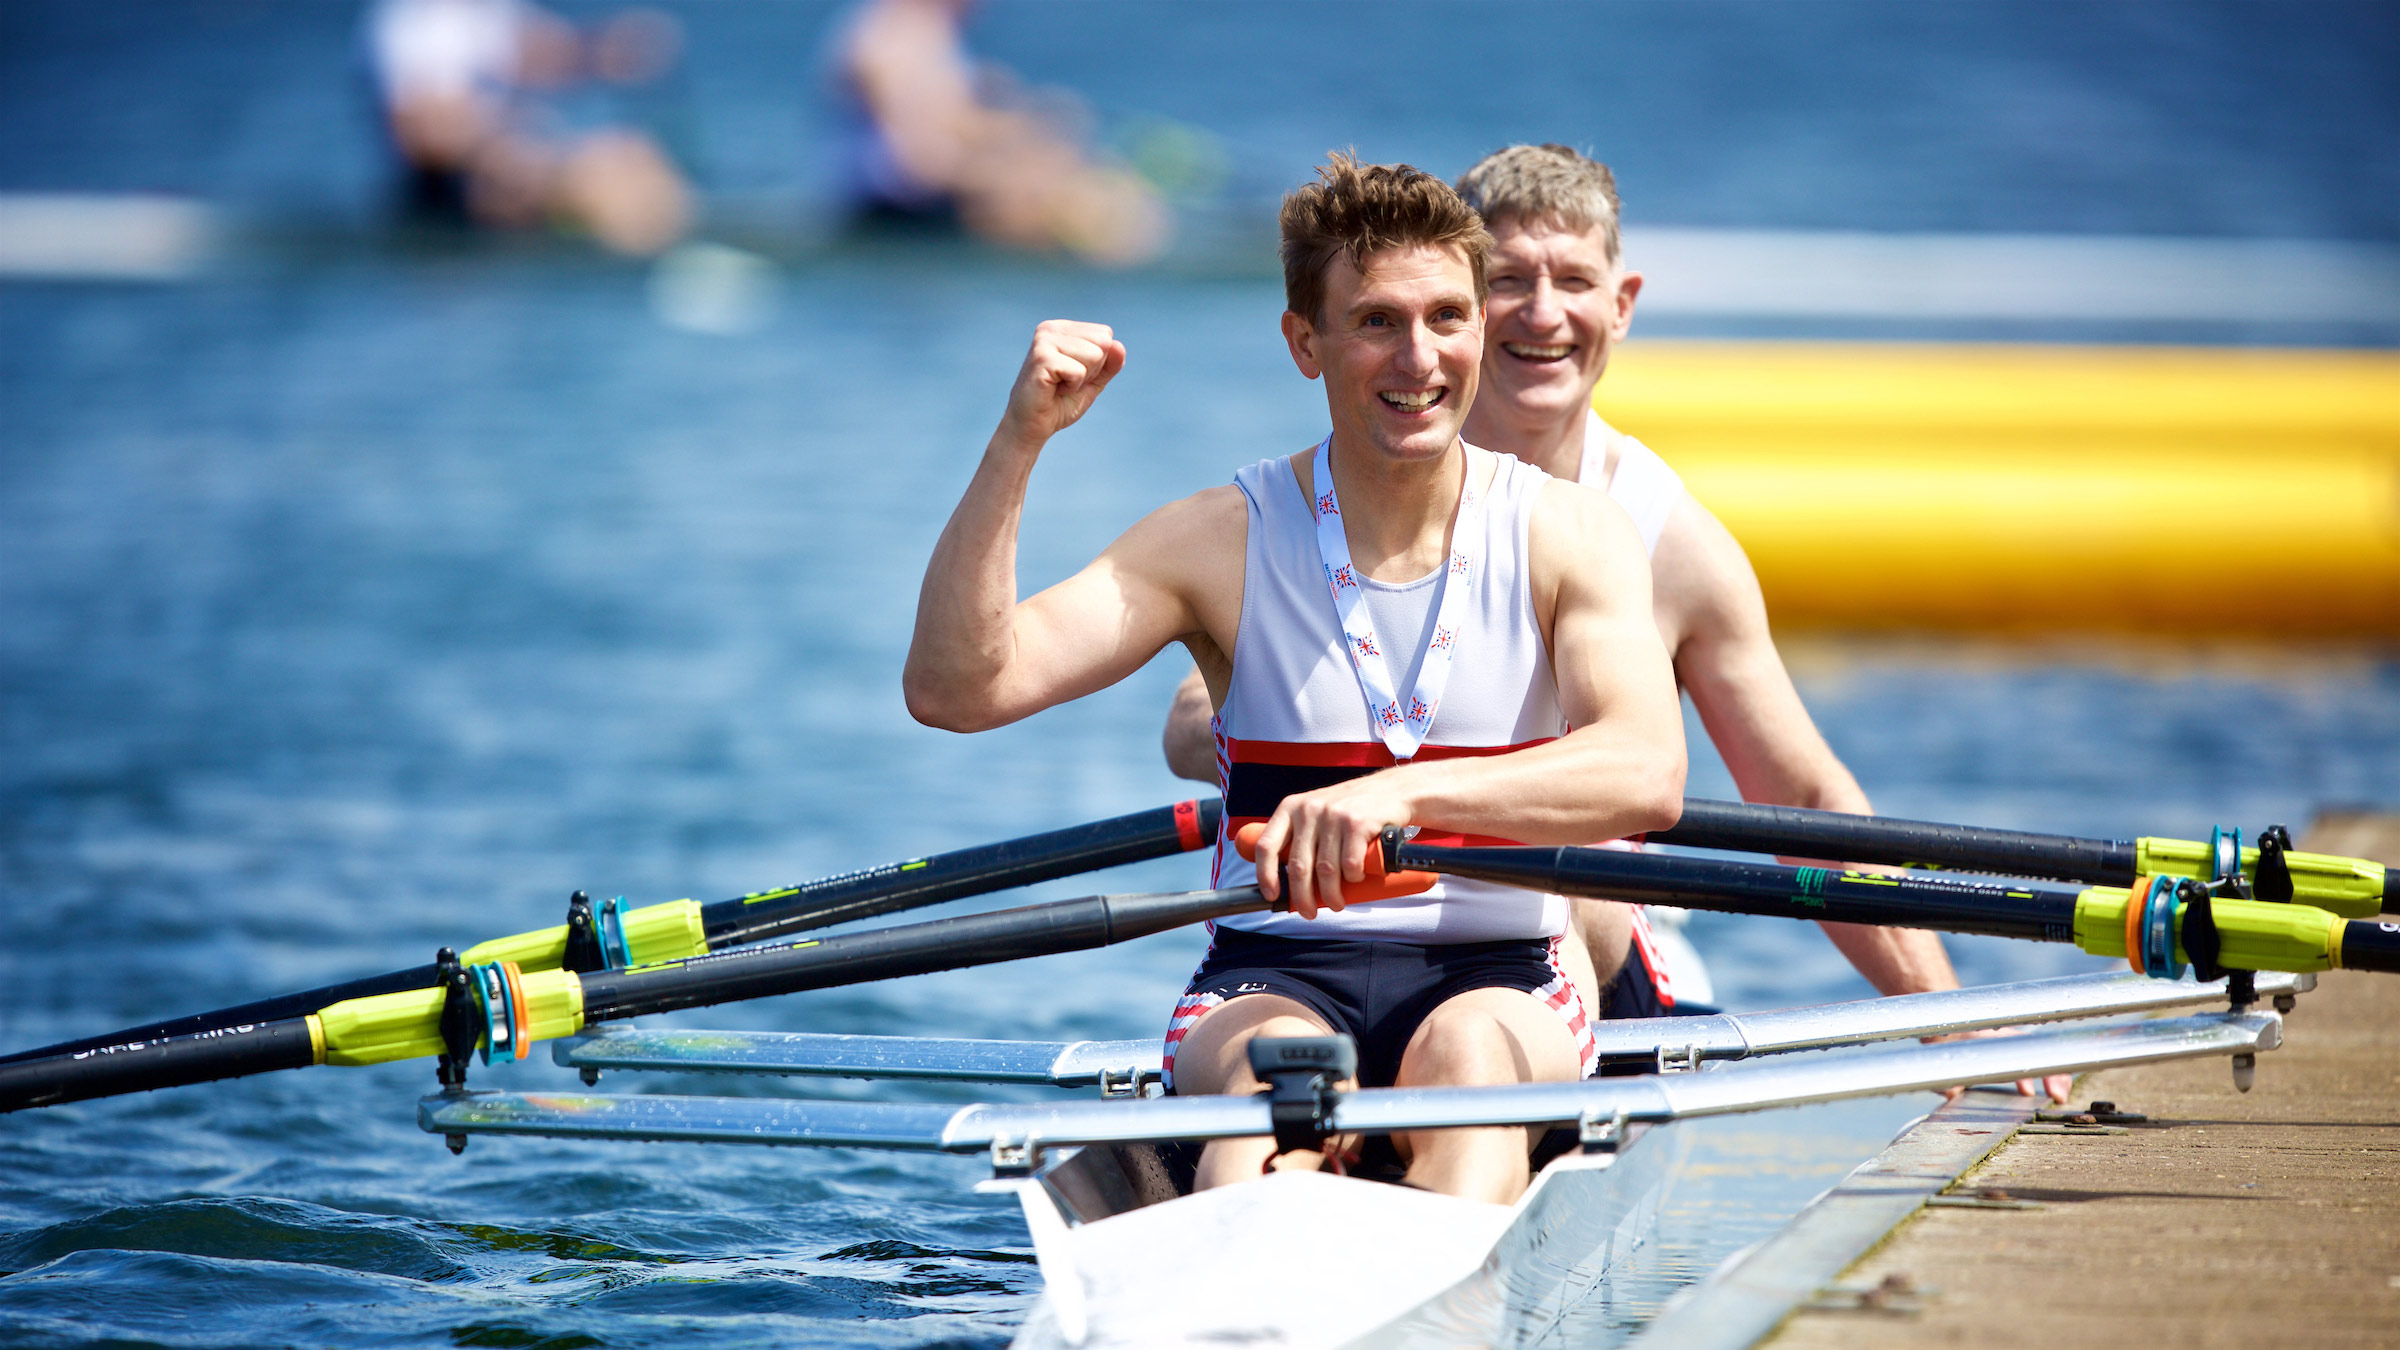 Nottingham prepares to host the British Rowing Masters Championships